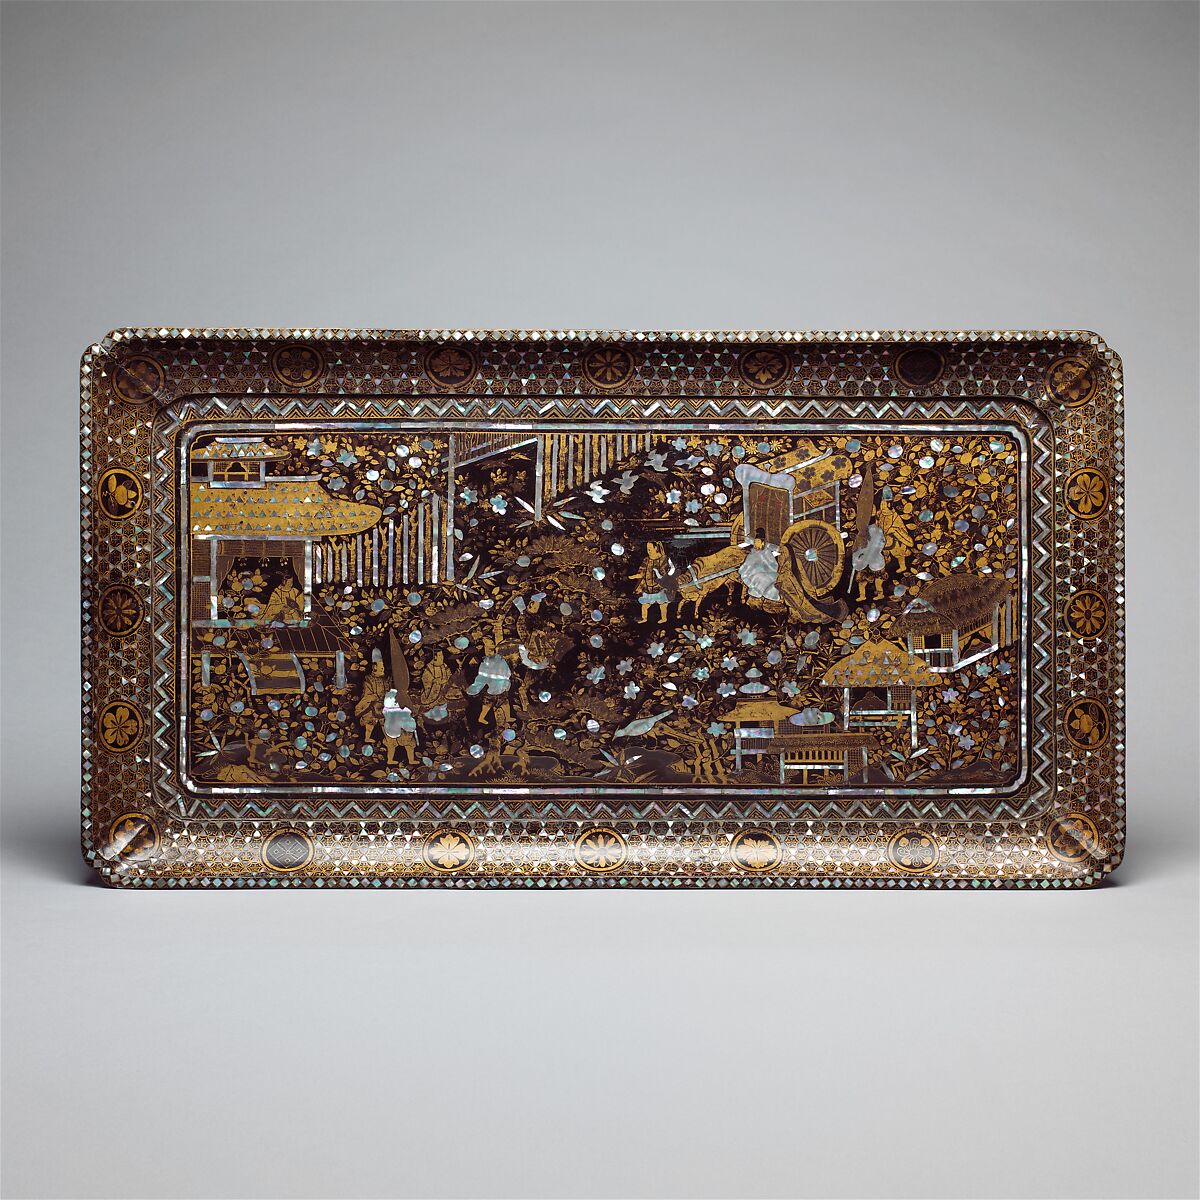 Tray with Scene from the Tale of Genji, Black lacquer with gold maki-e and mother-of-pearl inlay, Japan 